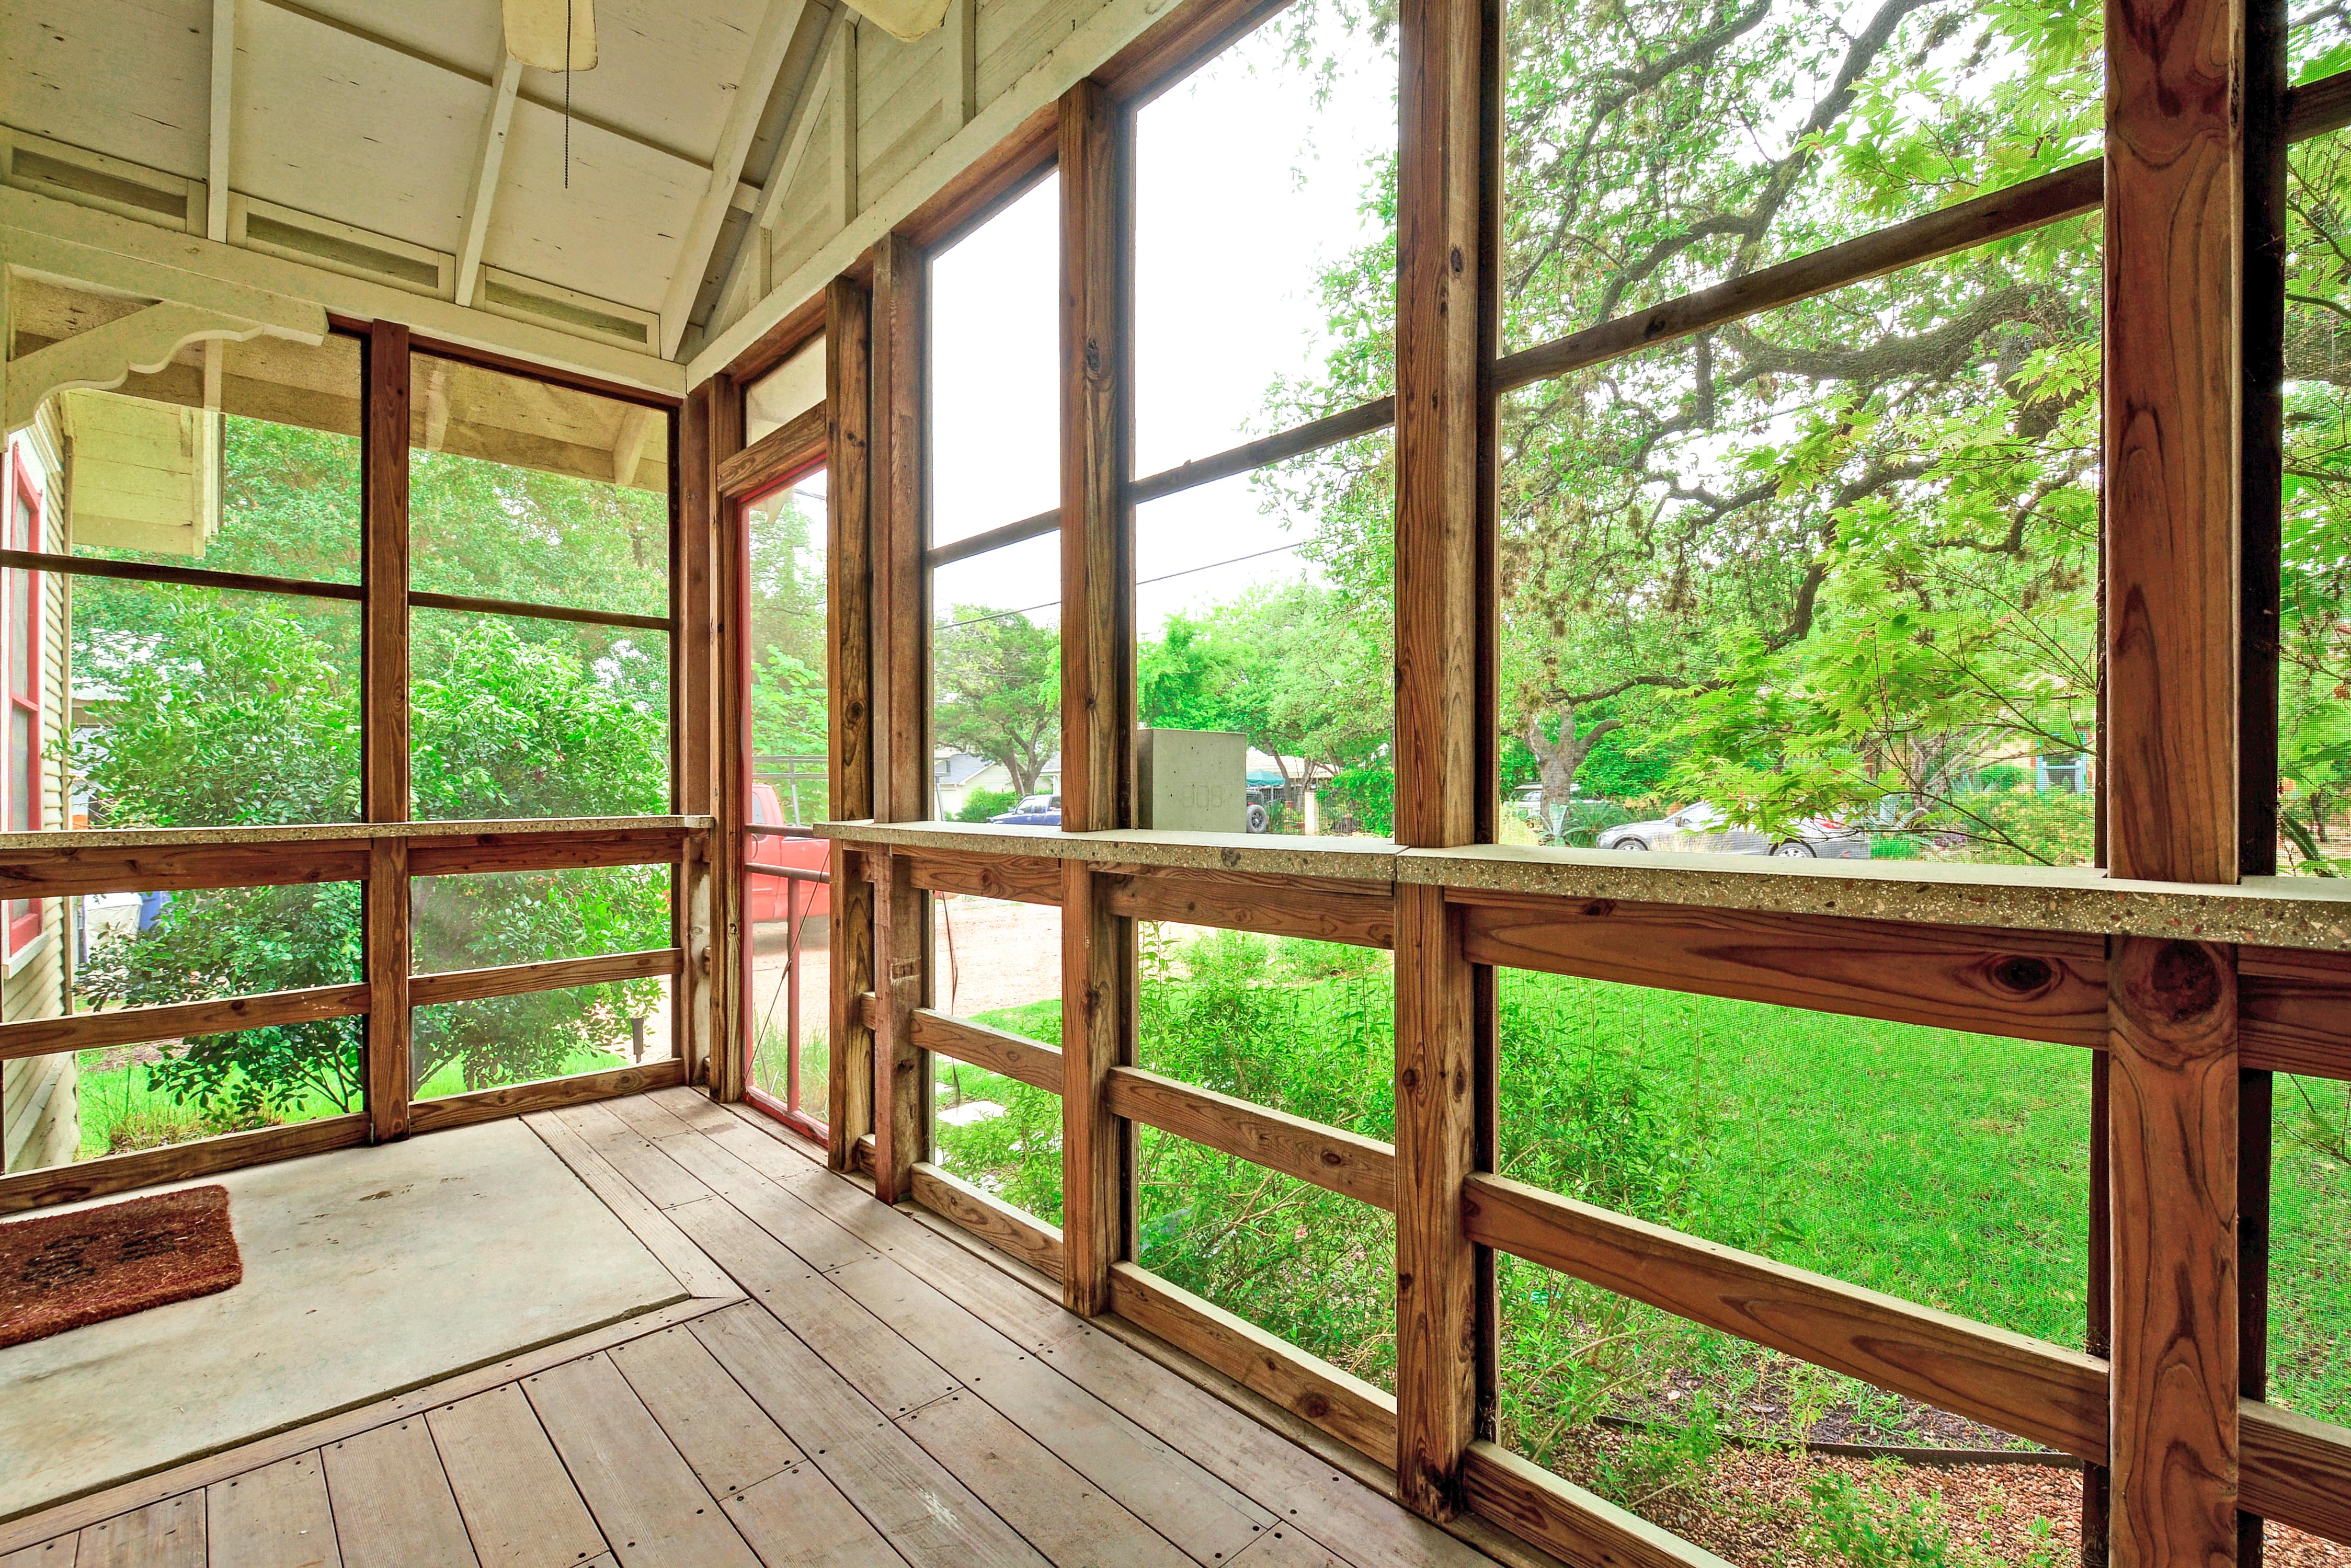 The screened front porch is a relaxing spot to enjoy morning coffee.